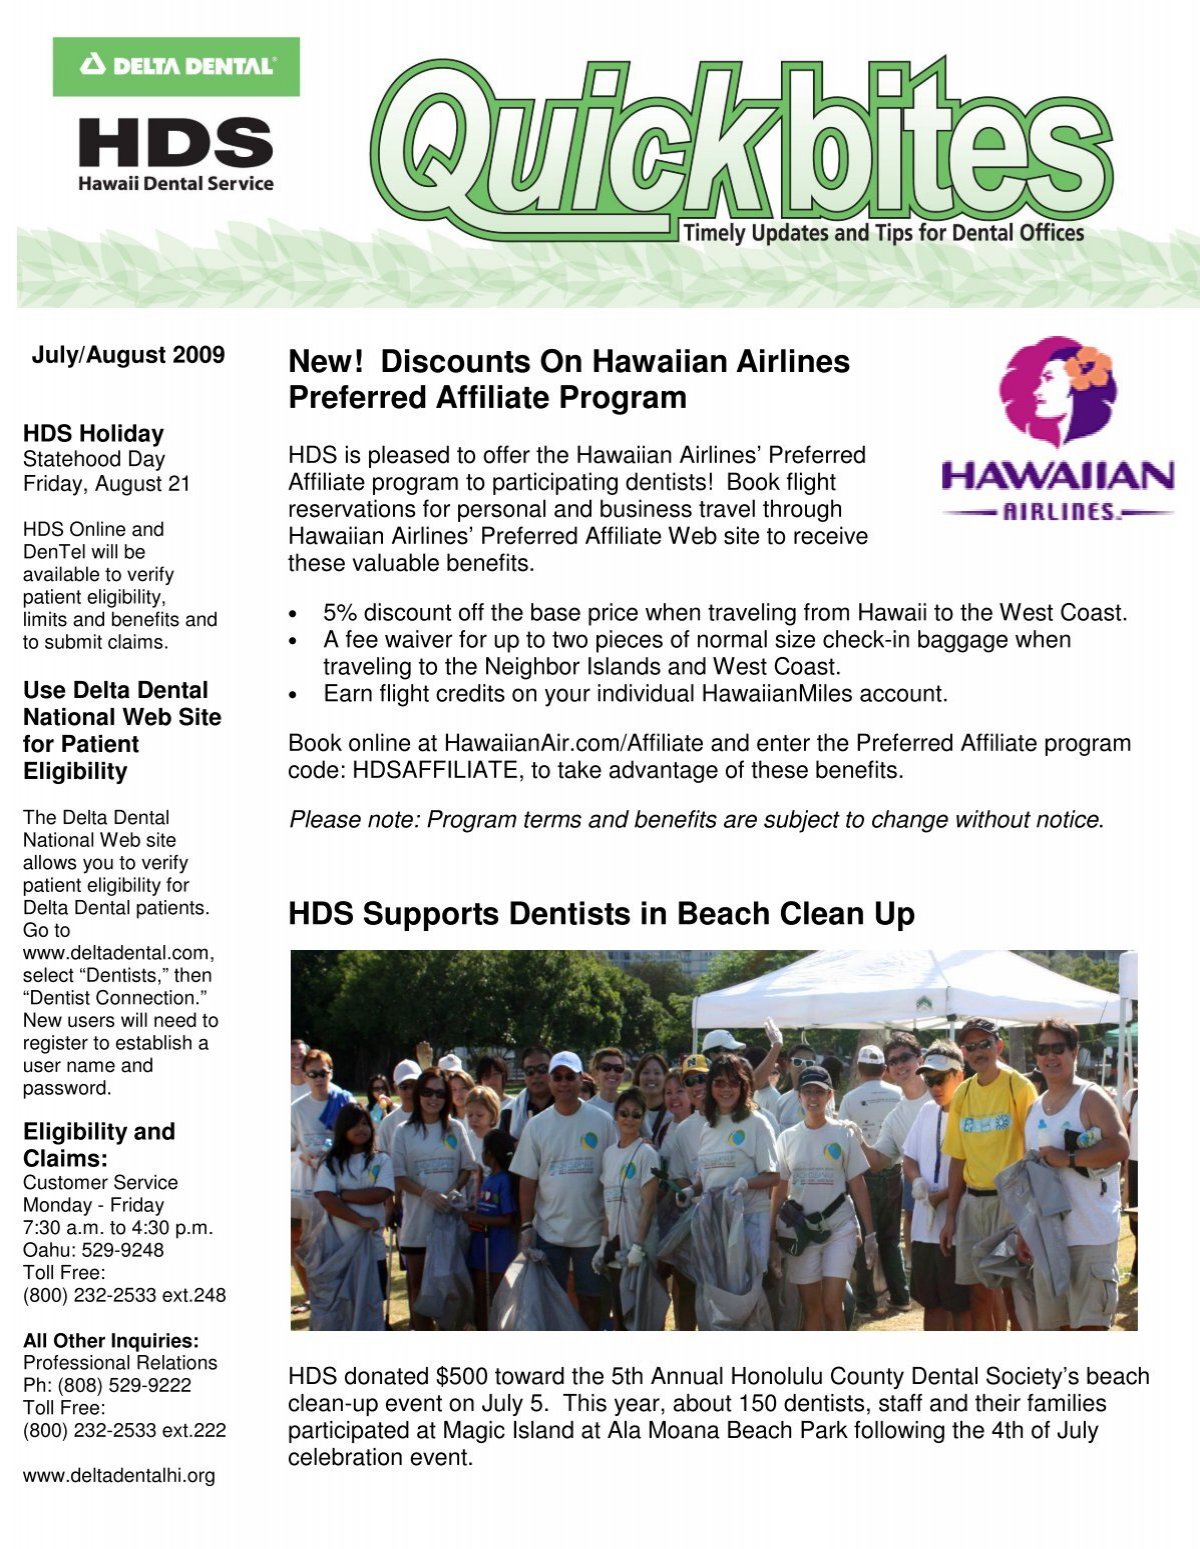 new-discounts-on-hawaiian-airlines-preferred-affiliate-program